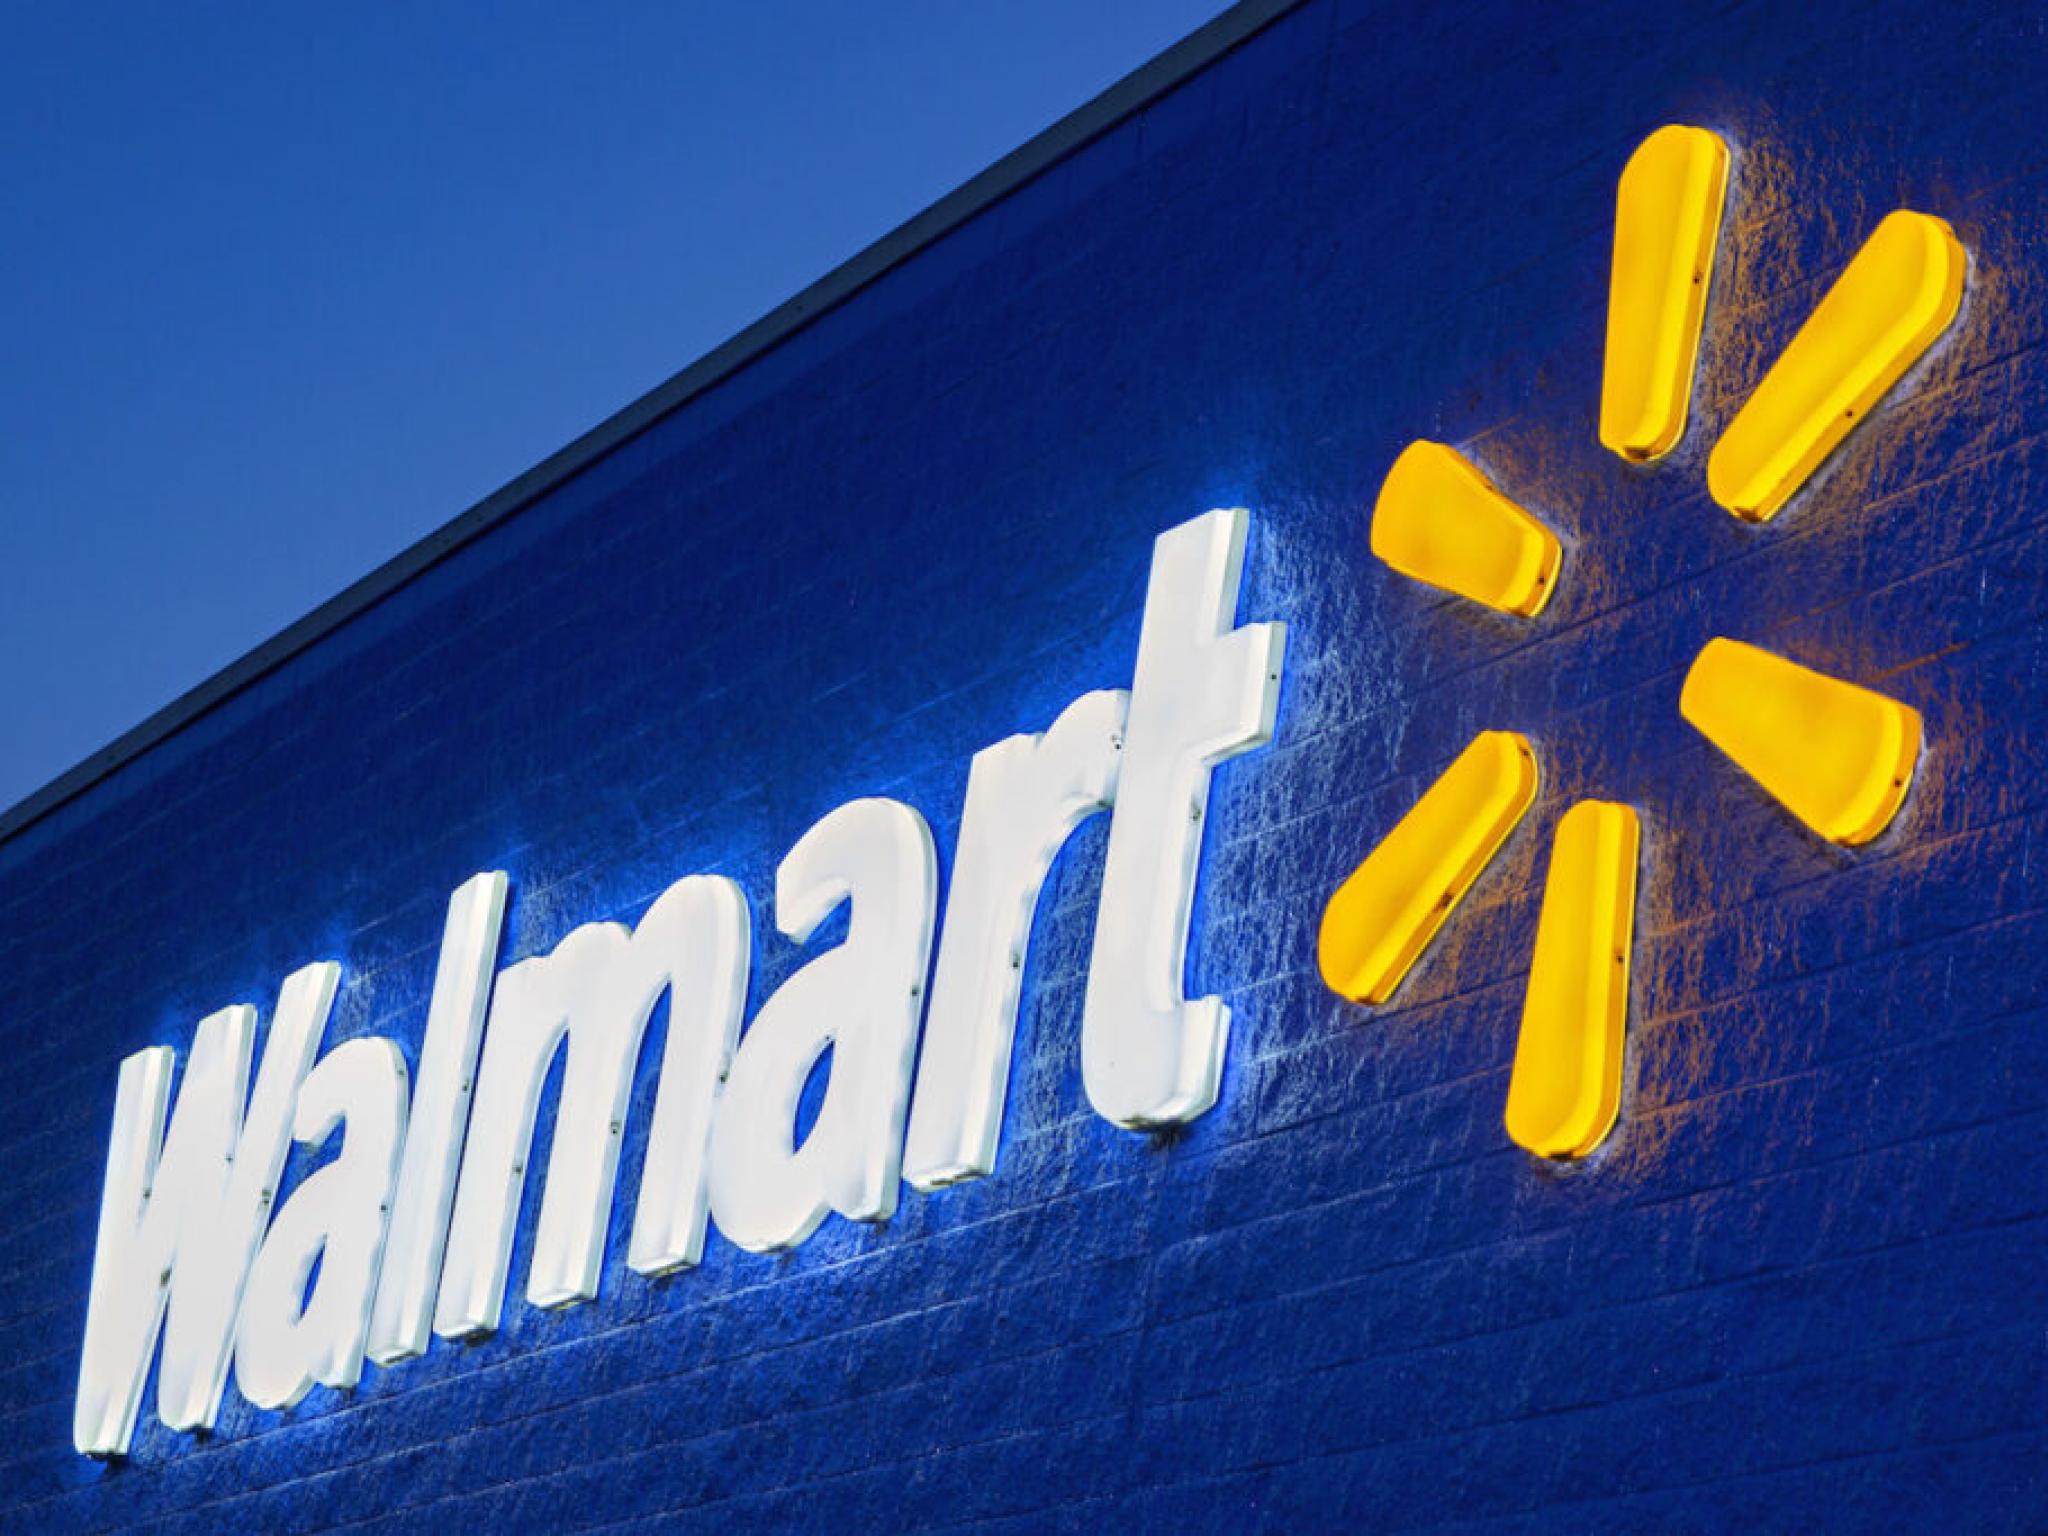  walmart-growth-incentives-are-hitting-stride-6-analysts-explore-q1-earnings 